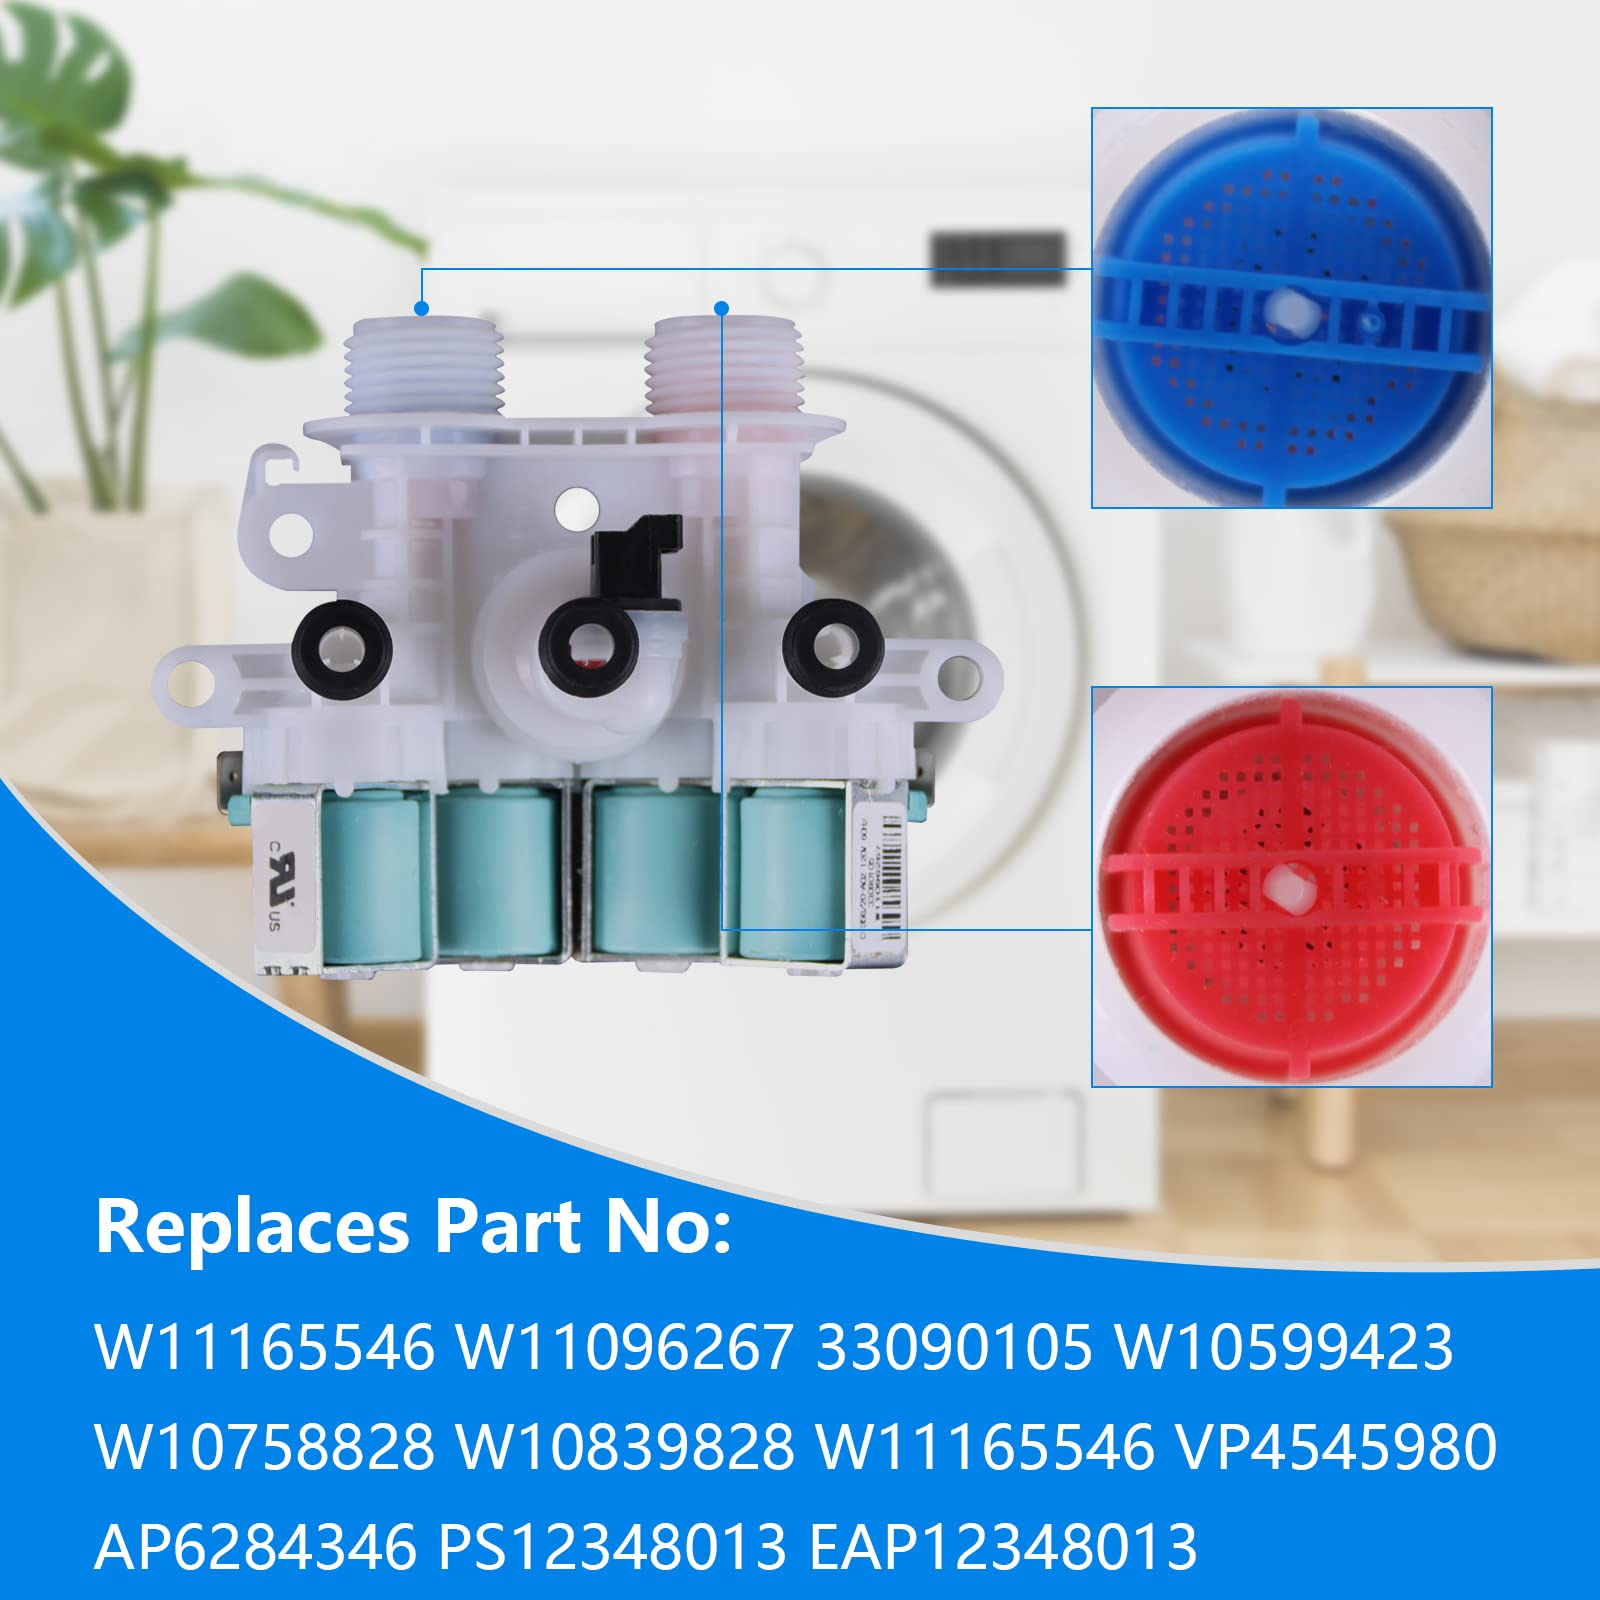 W11165546 W11096267 Washer Water Inlet Valve replacement Compatible with Whir-pool Washing Machine Replaces part# W10632527 W10758829 W10853296  W11165546VP AP63295444 33090105 W10758828 W10839828